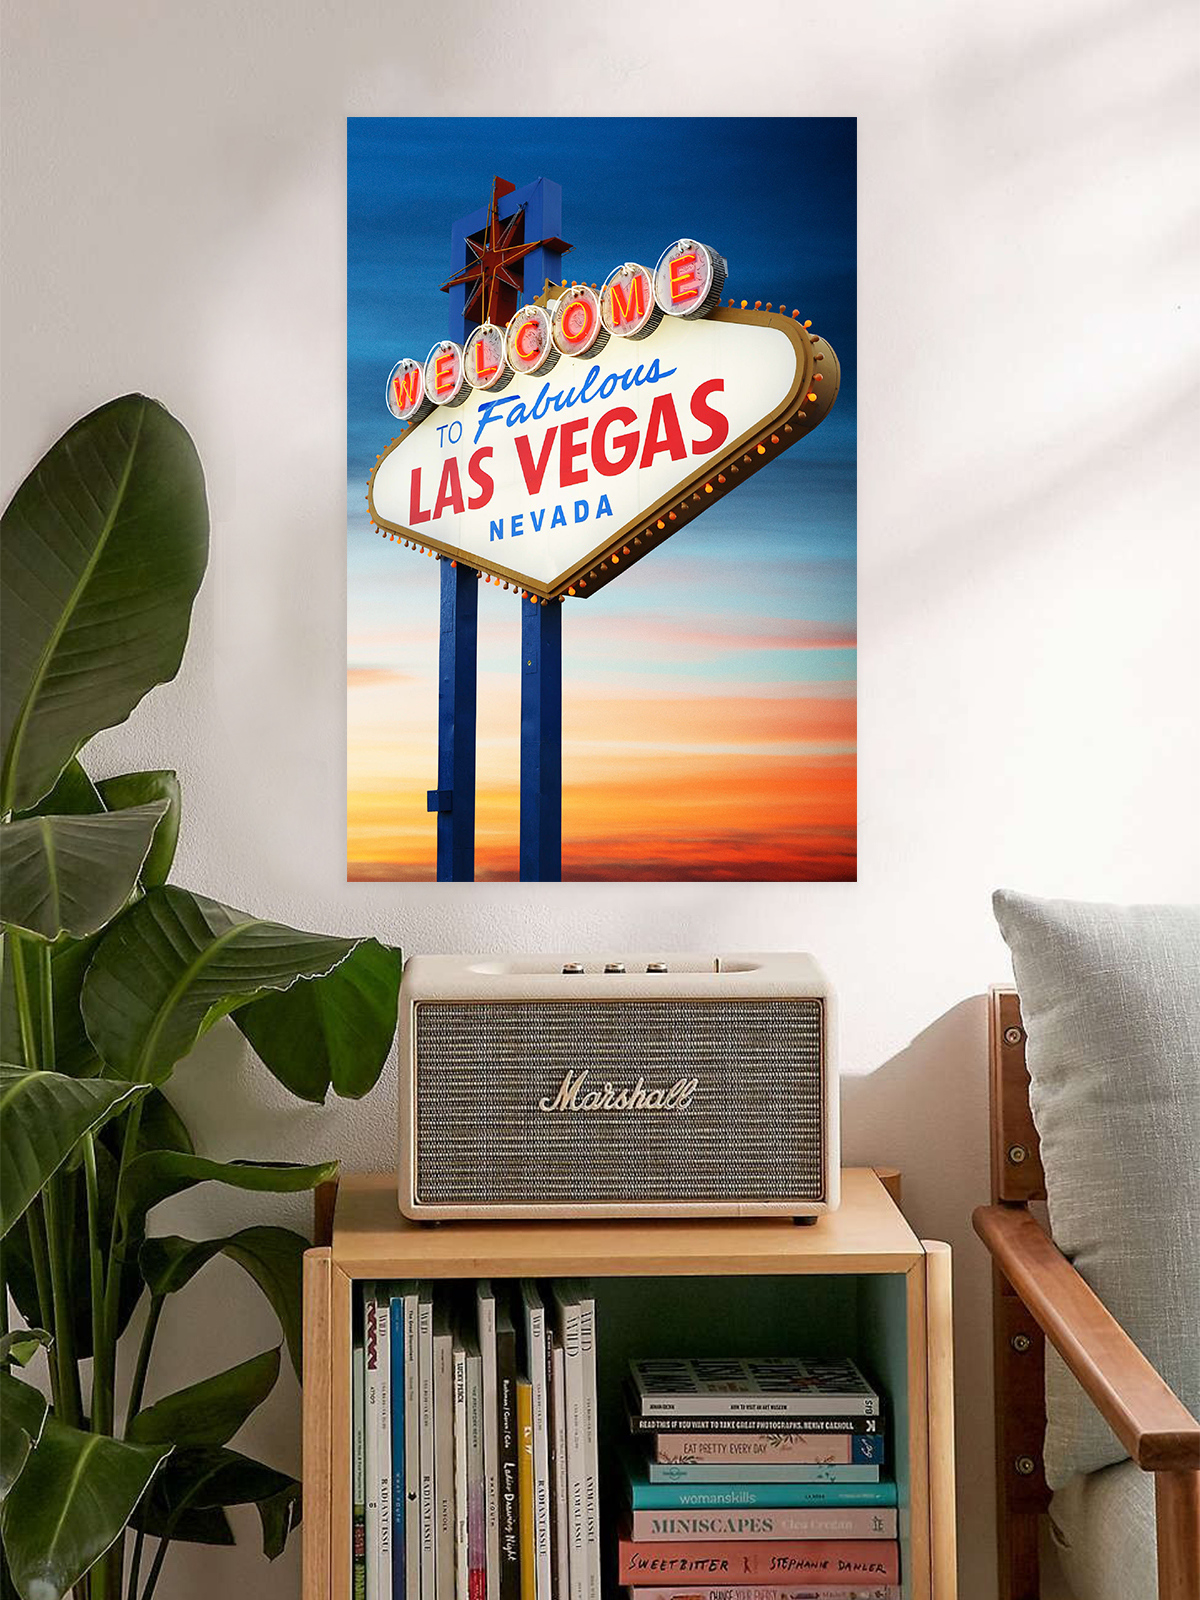 Awkward Styles Welcome to Fabulous Las Vegas Sign Poster Artwork Las Vegas Printed Decor for Office Welcome to Fabulous Las Vegas Poster Wall Art Printed Photo American Poster Stylish Decor Ideas - image 2 of 3